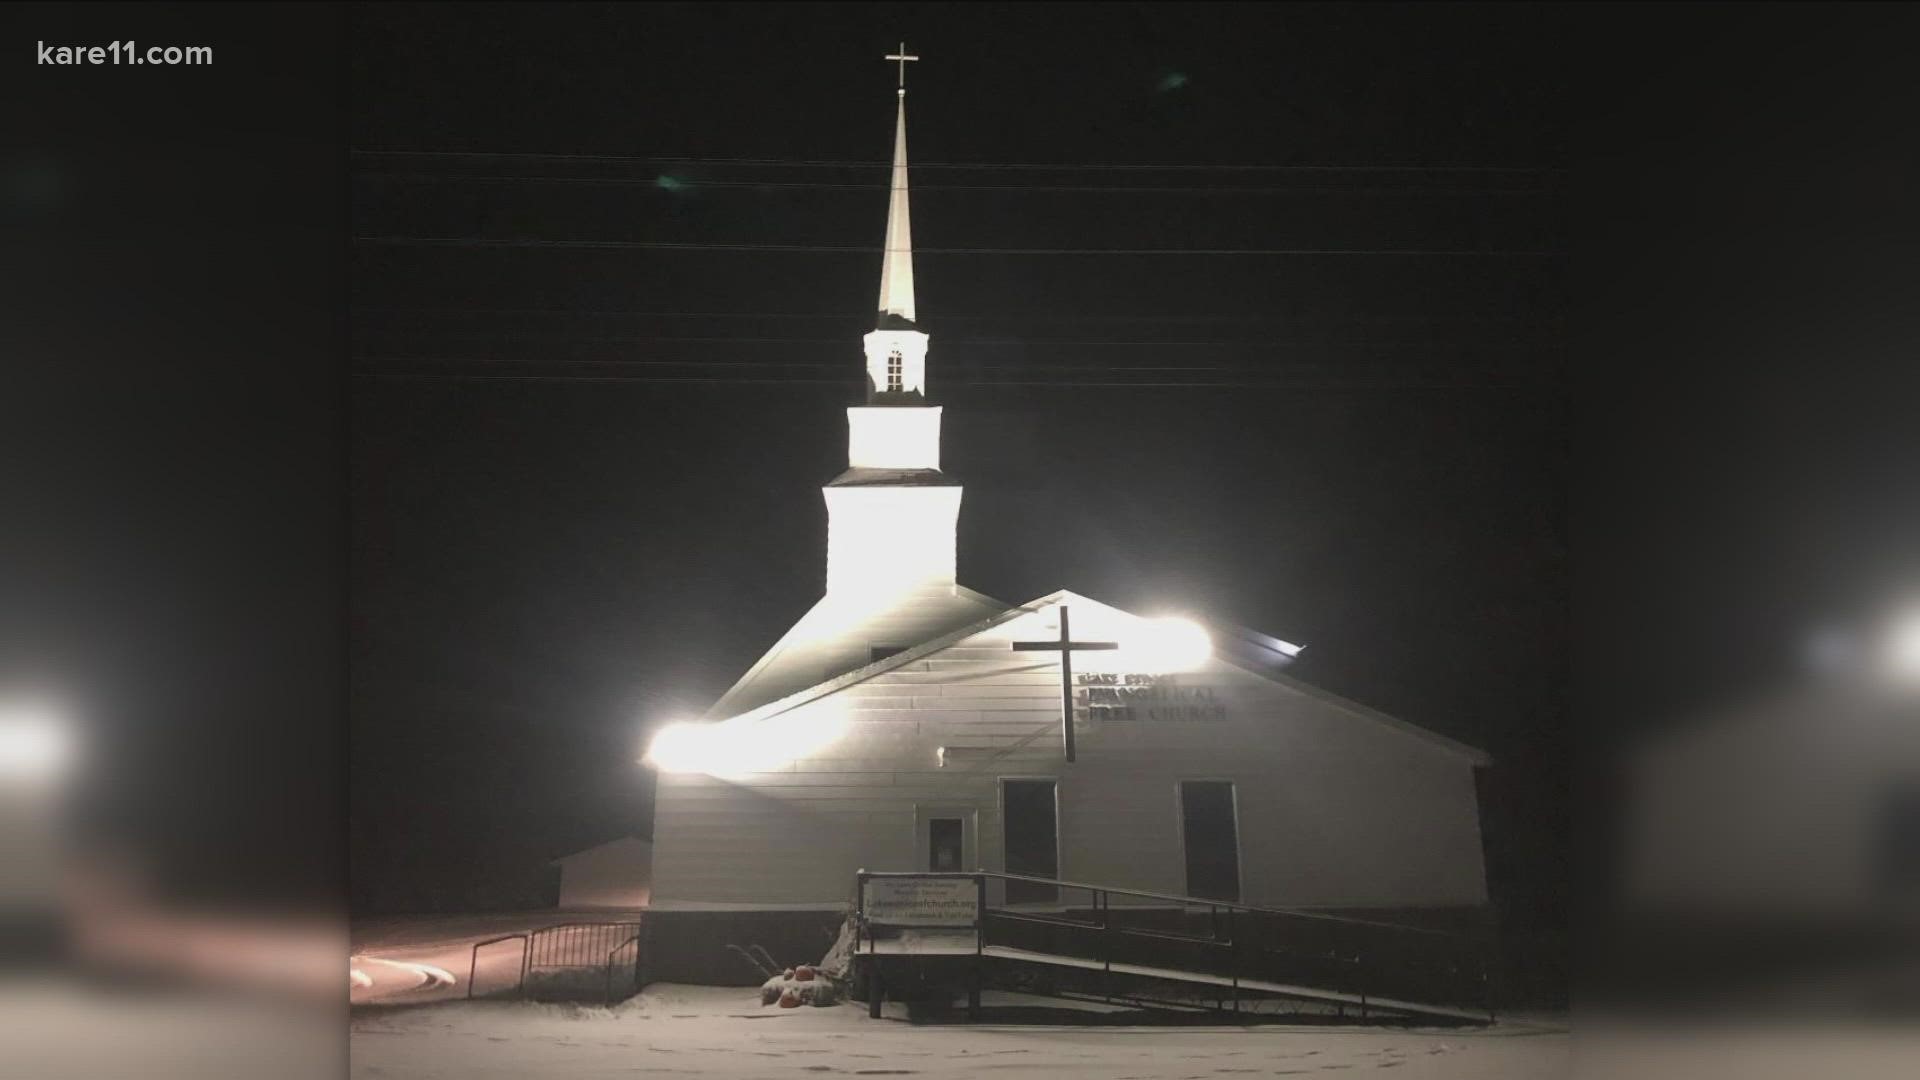 From boyhood, Larry Backlund always thought the steeple-less church his family attended needed one.